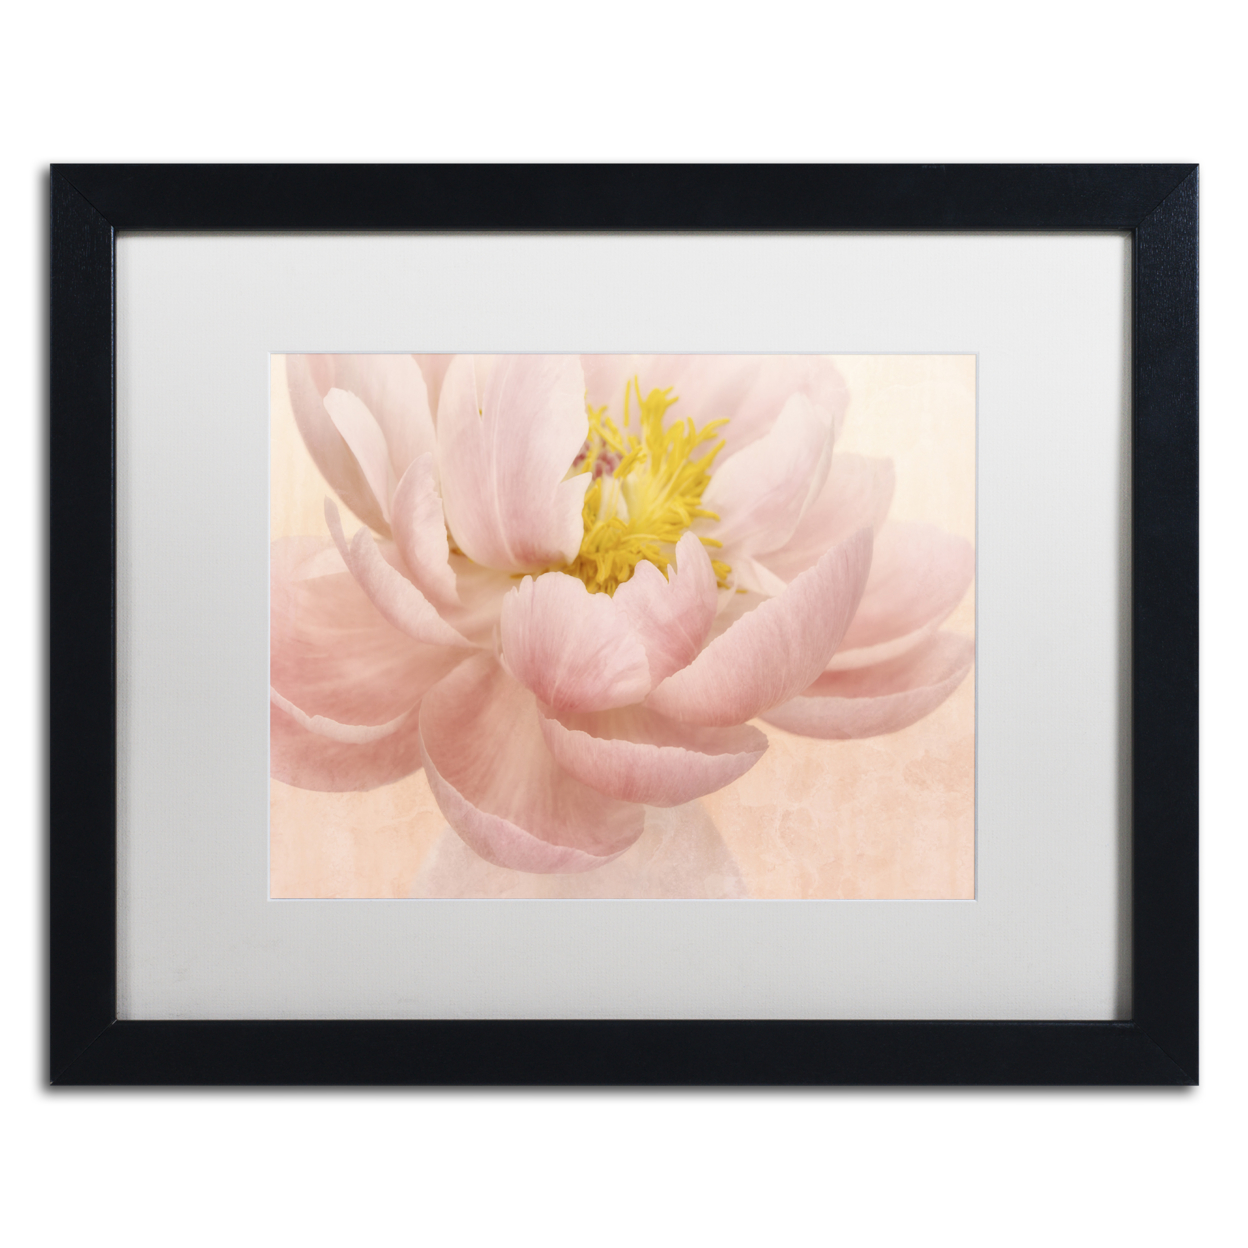 Cora Niele 'Pink Peony' Black Wooden Framed Art 18 X 22 Inches